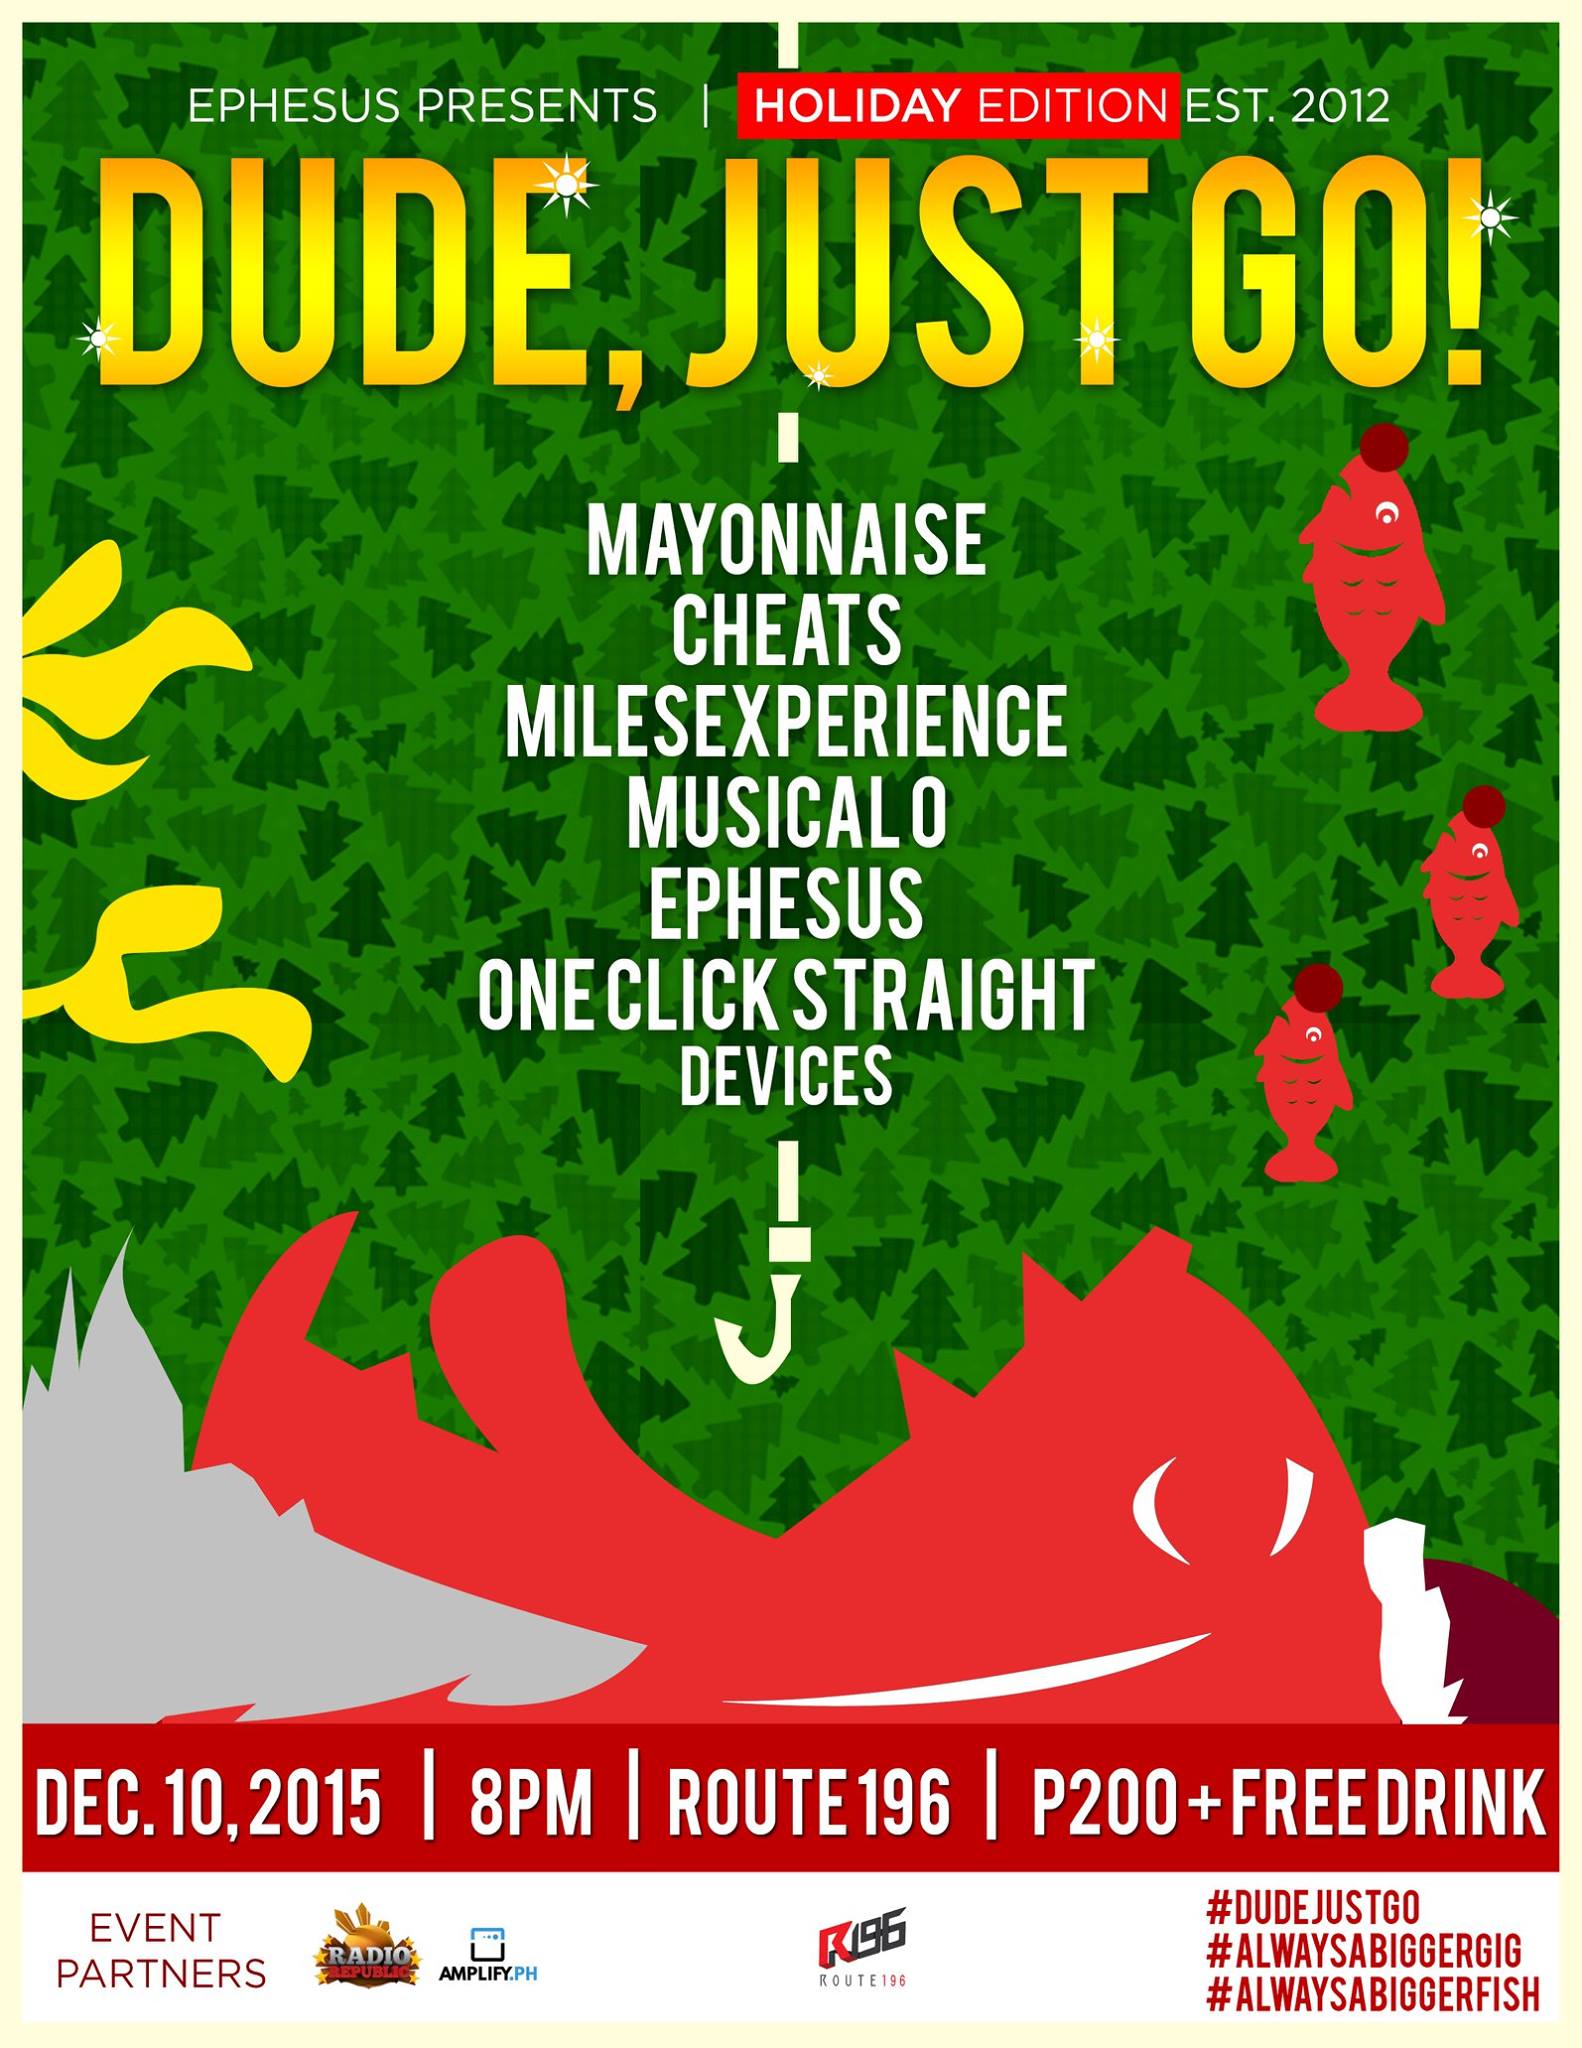 DUDE, JUST GO! HOLIDAY EDITION clock Thursday, December 10 at 8:00pm Next Week · 92°F / 75°F Partly Cloudy pin Show Map Route 196 Bar 196-A Katipunan Avenue Extension, Blue Ridge A, Quezon City, Philippines Ho ho HOLEEEE NIGHT we're back!!! DUDE, JUST GO! THE HOLIDAY EDITION DECEMBER 10, 2015 ROUTE 196 KATIPUNAN 8PM SHARP High-five Santa and thank him as he helps us bring you an amazing lineup: MAYONNAISE CHEATS MILESEXPERIENCE MUSICAL O EPHESUS ONE CLICK STRAIGHT DEVICES HUGE THANKS to our event partners: Radio Republic Amplify.ph Route 196 Bar #dudejustgo #alwaysabiggergig #alwaysabiggerfish